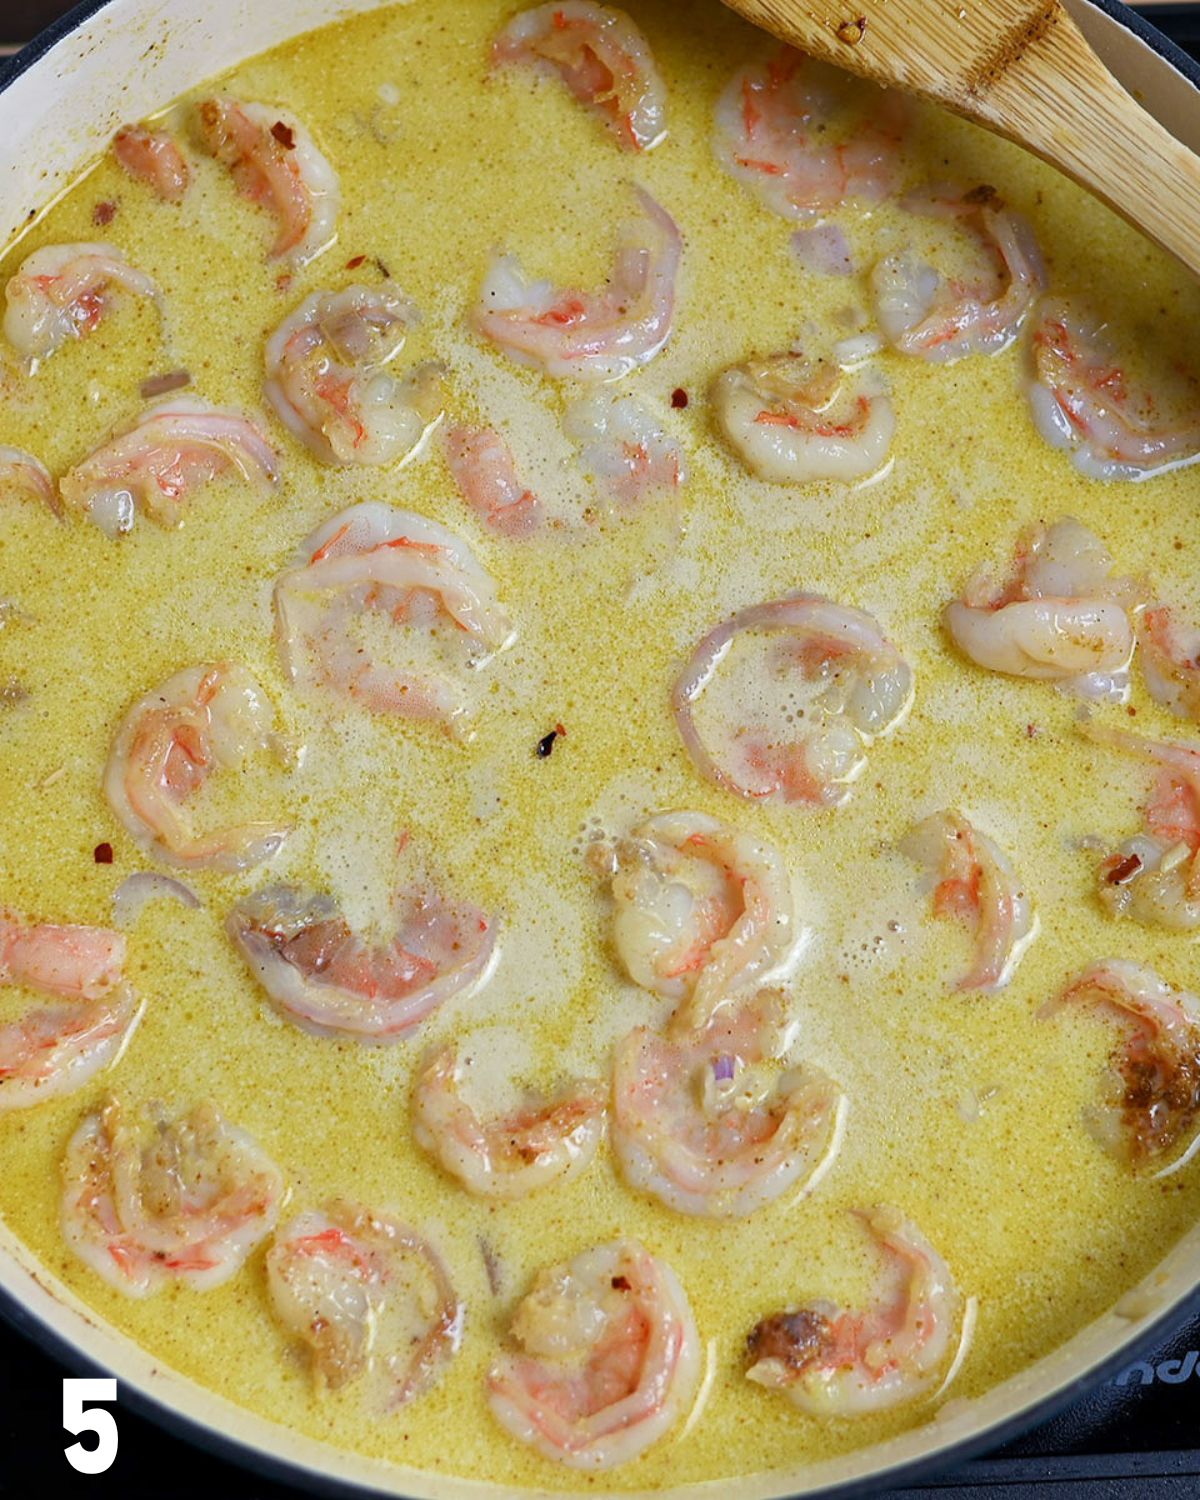 Coconut milk and broth added to shrimp cooking in a skillet.